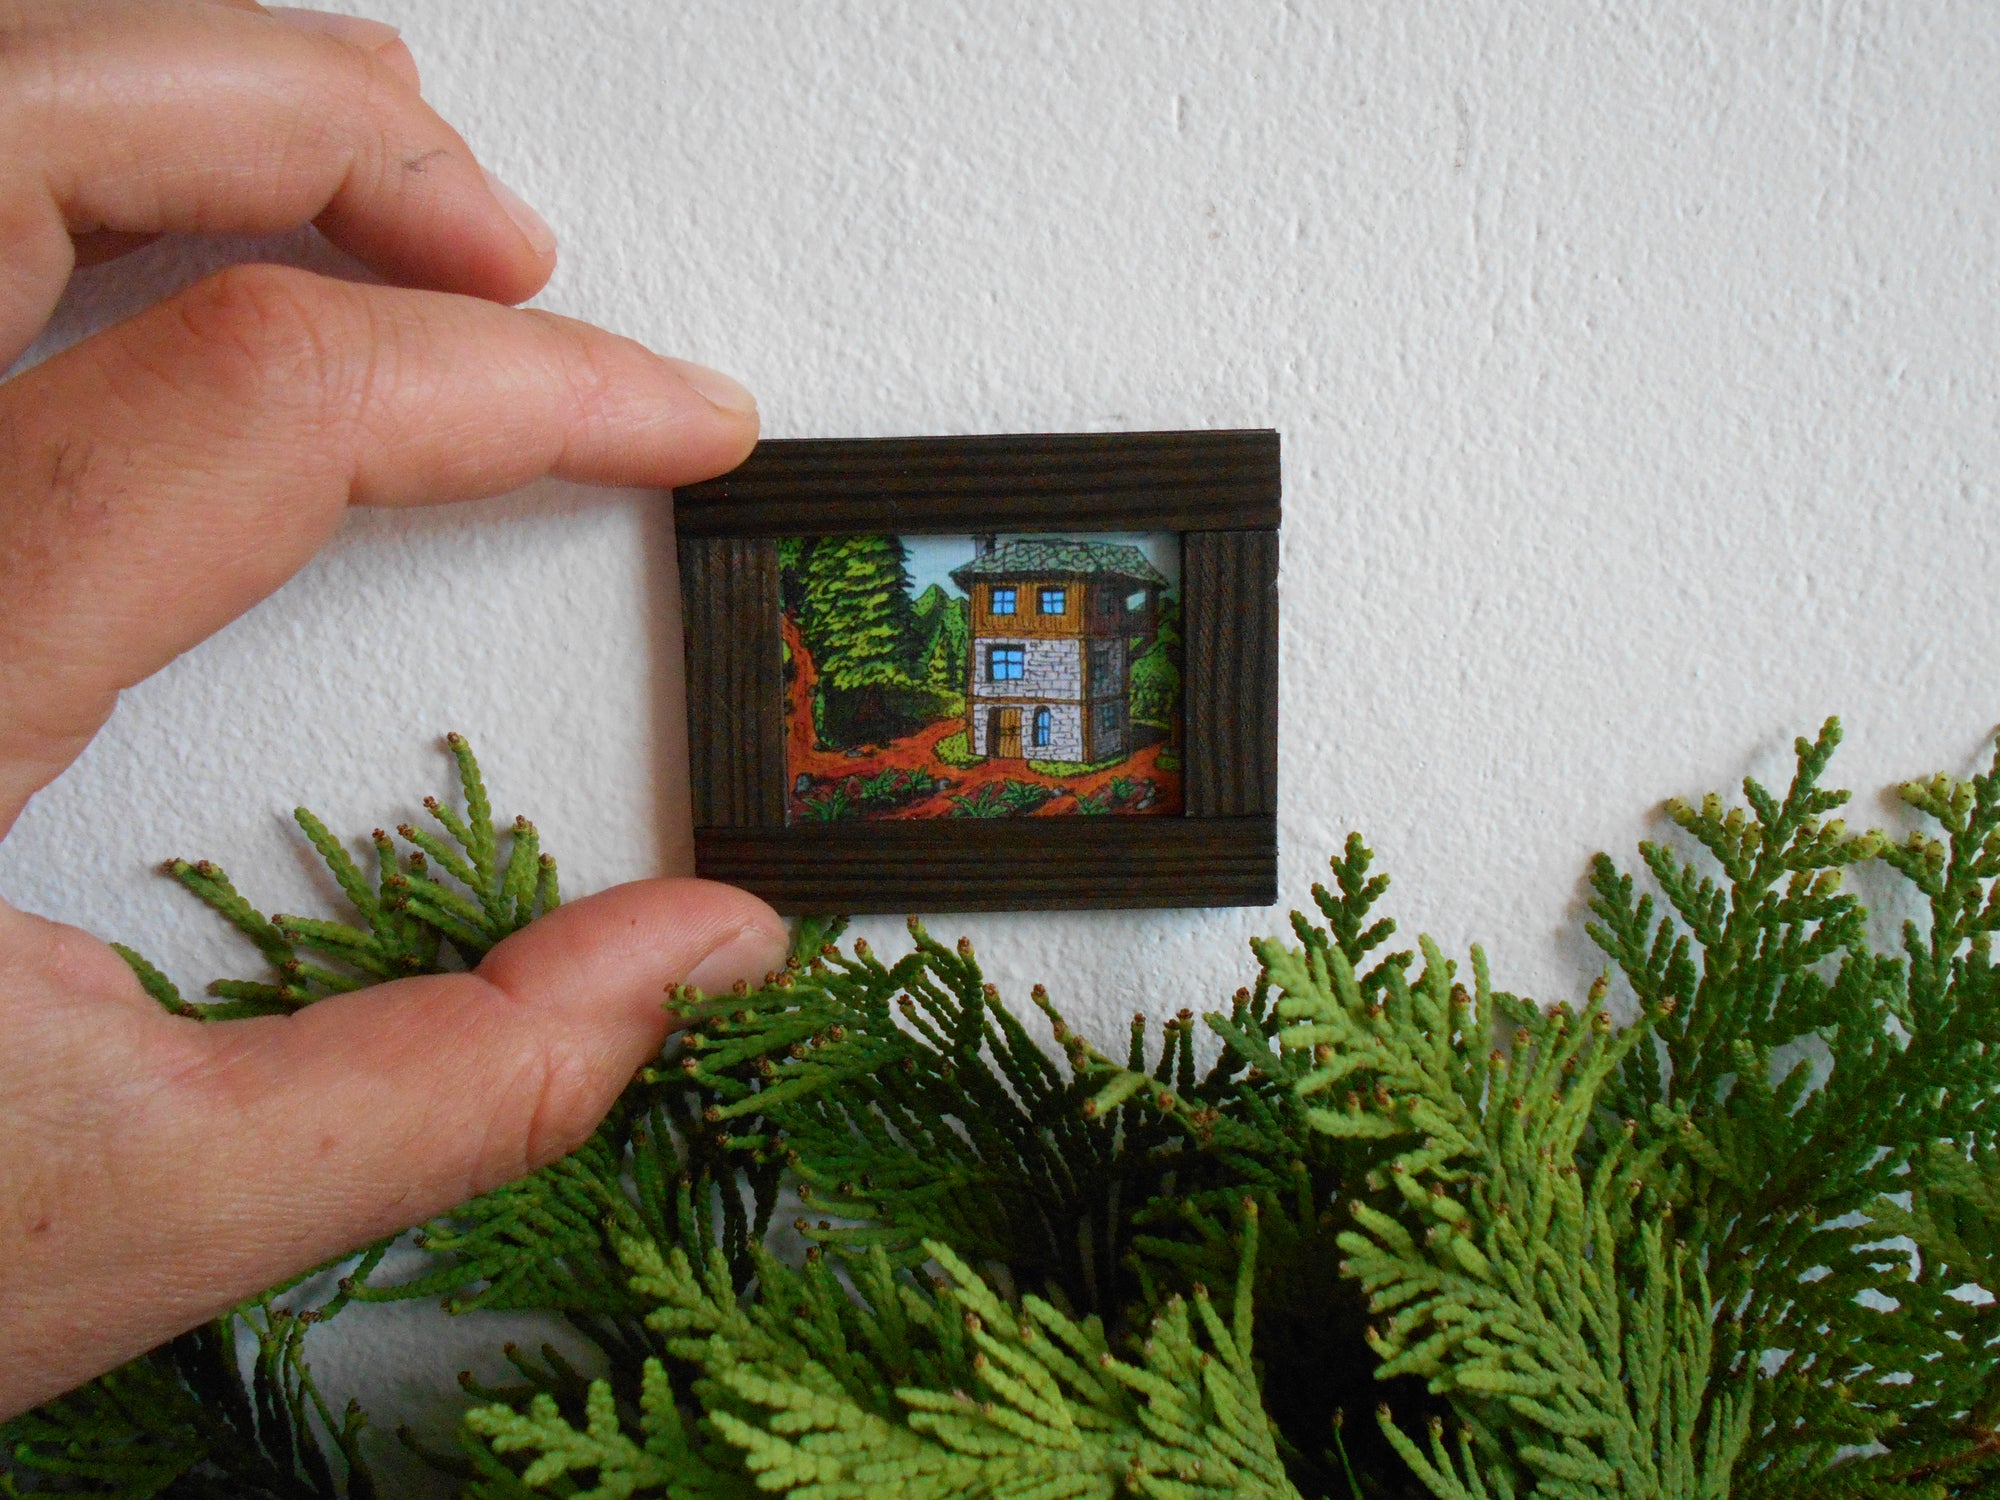 Handmade miniature wooden framed painting artwork for dollhouse collectors with an art of a mountain landscape and a logghouse hut cottage and a garden by ExiArts eco-friendly company from Bulgaria.